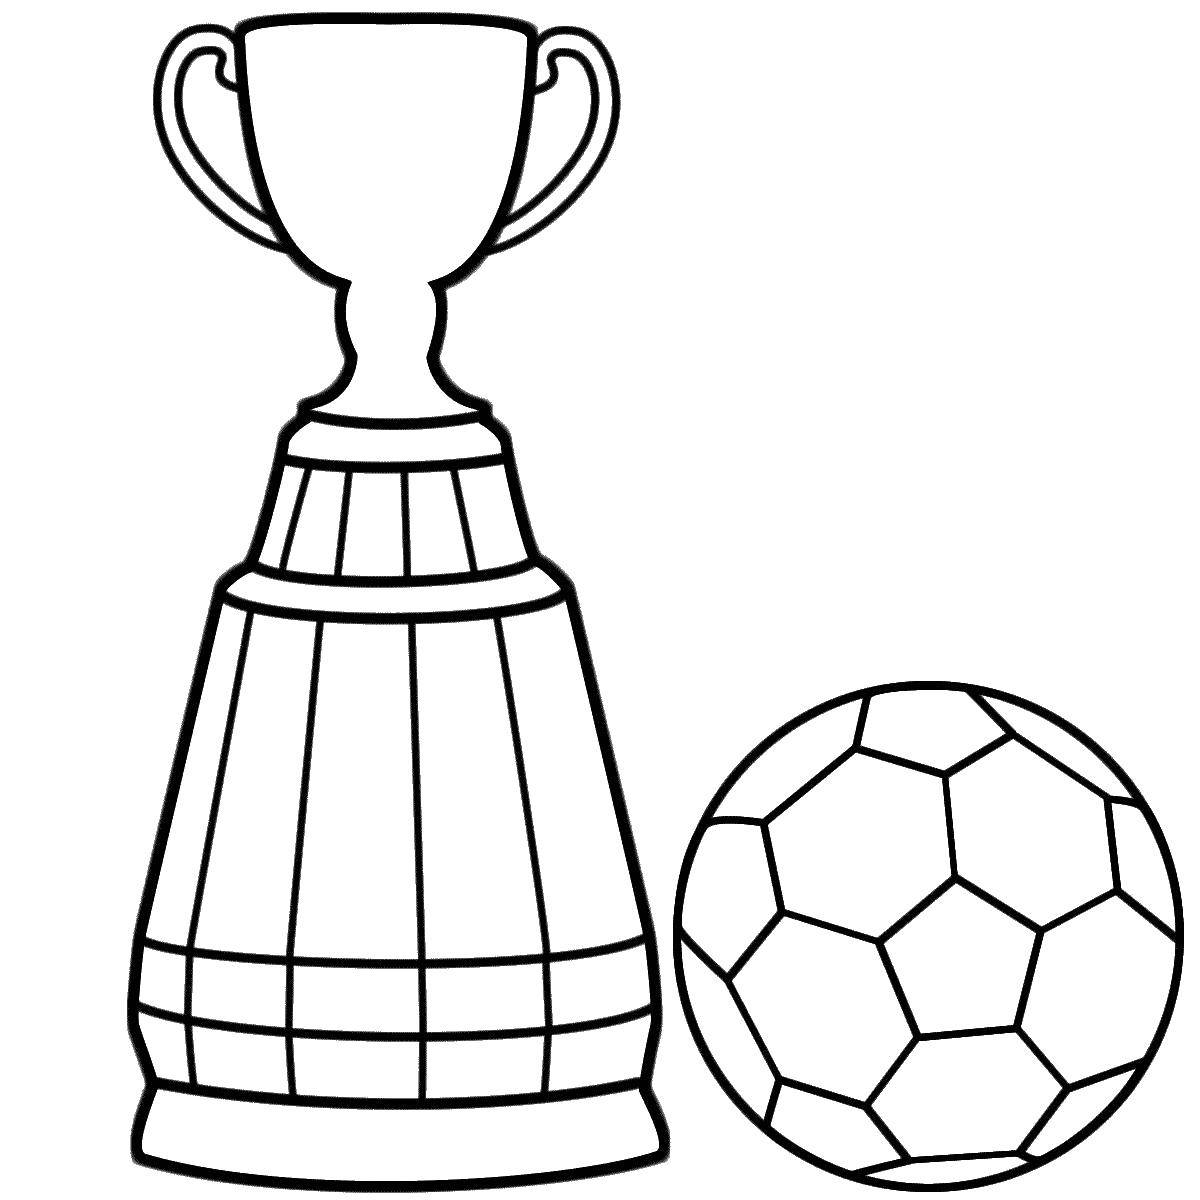 Coloring The Cup, the ball. Category Football. Tags:  soccer, ball, Cup.